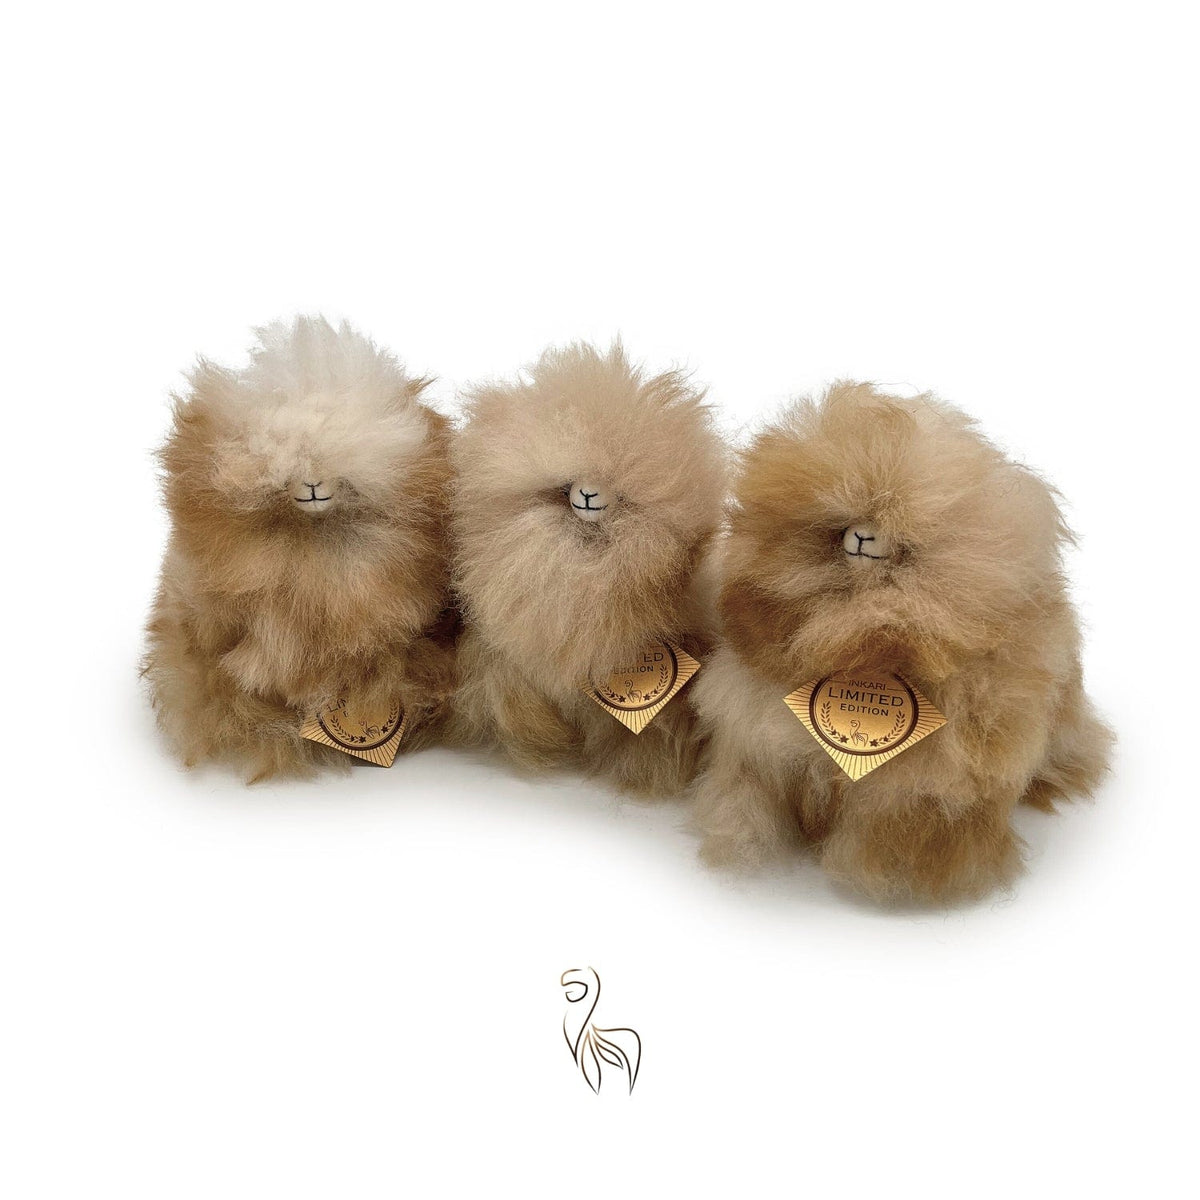 Fluff Monster - Smores - Mini Alpaca Toy (15cm) - Limited Edition